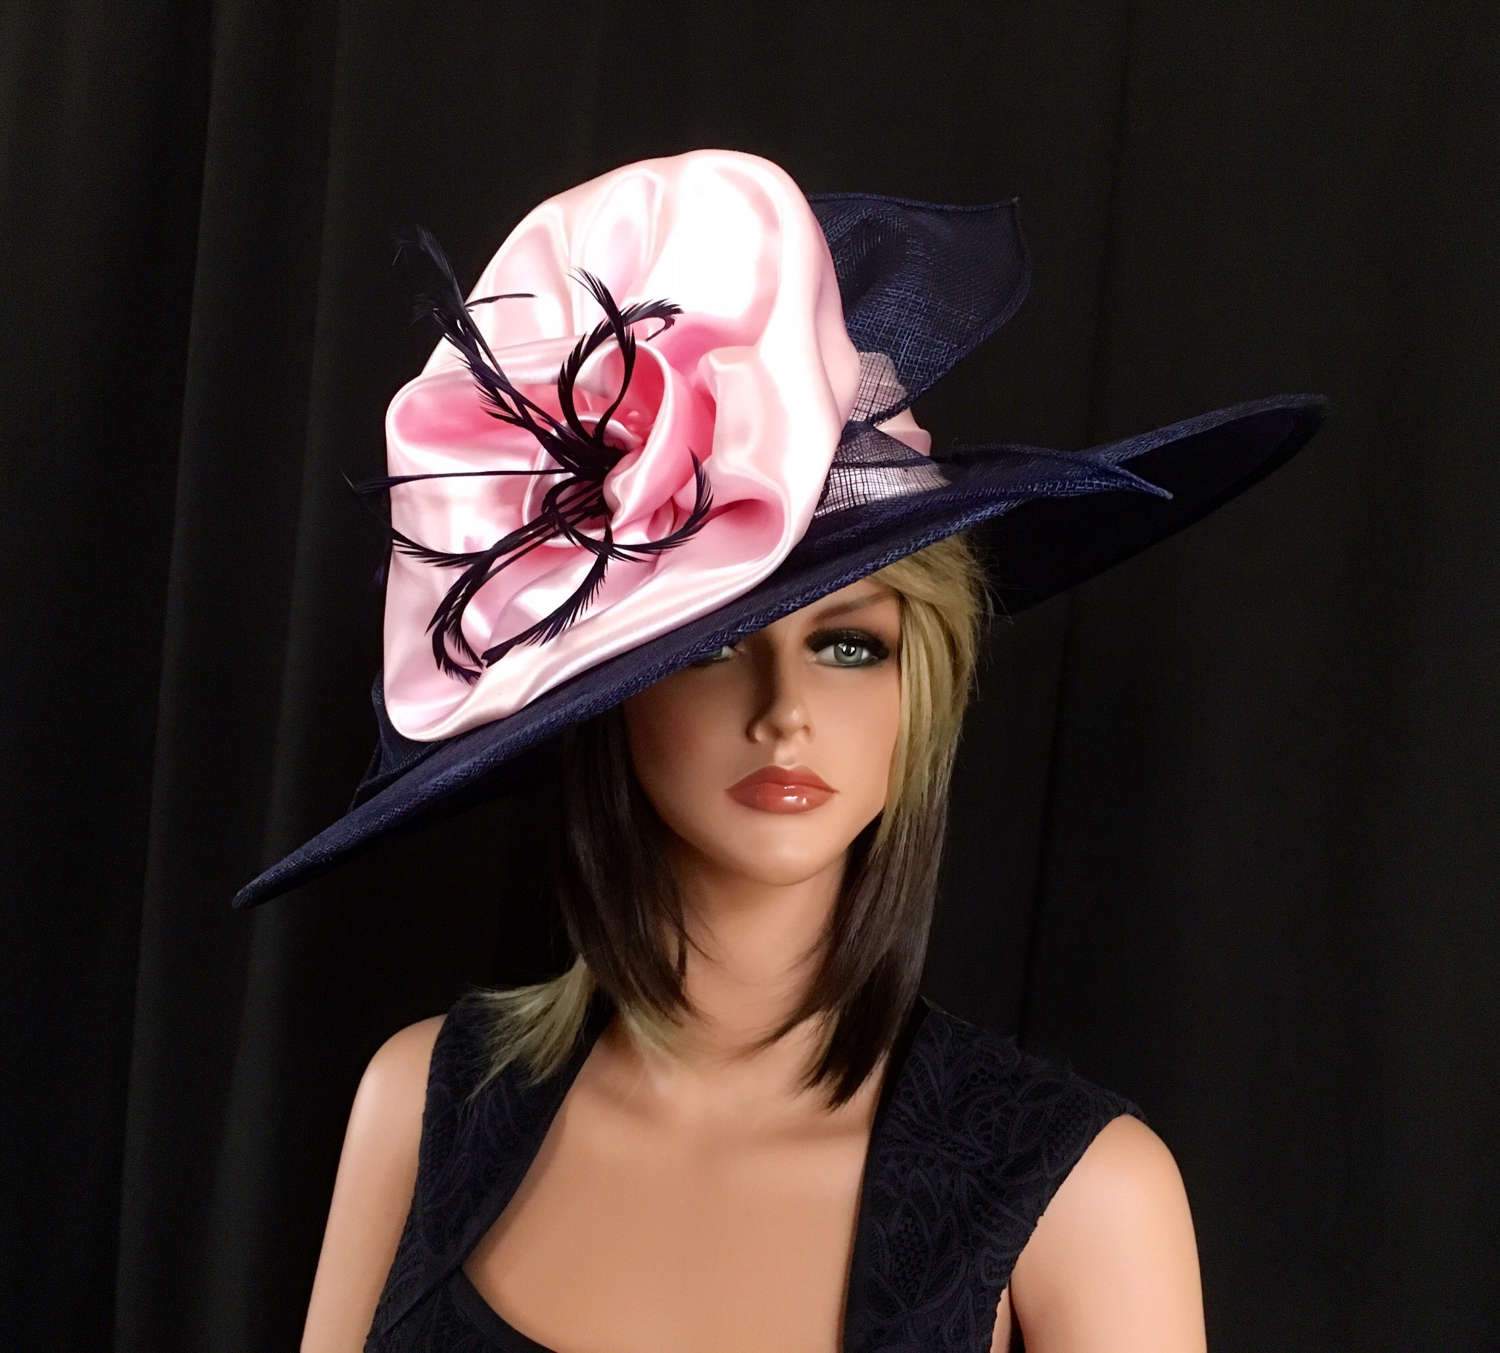 Kentucky Derby hat. Royal Ascot .Formal hat. Navy blue and pink hat for Del Mar races, wedding or other occasions. Couture hat, designer hat